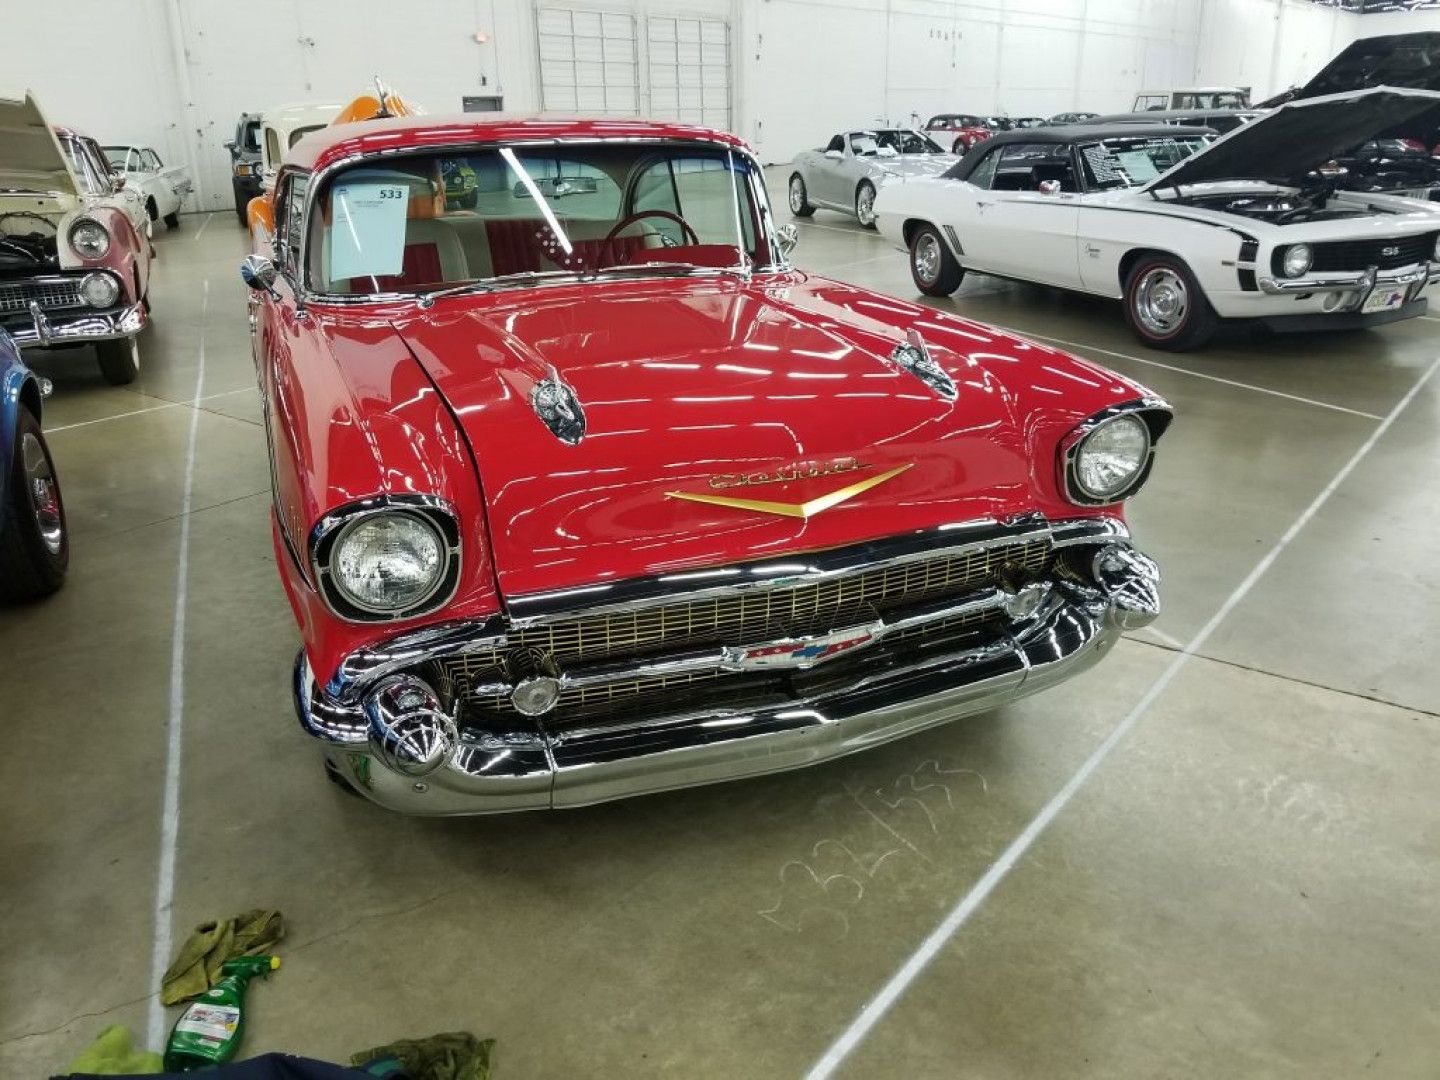 a red chevrolet is parked in a garage